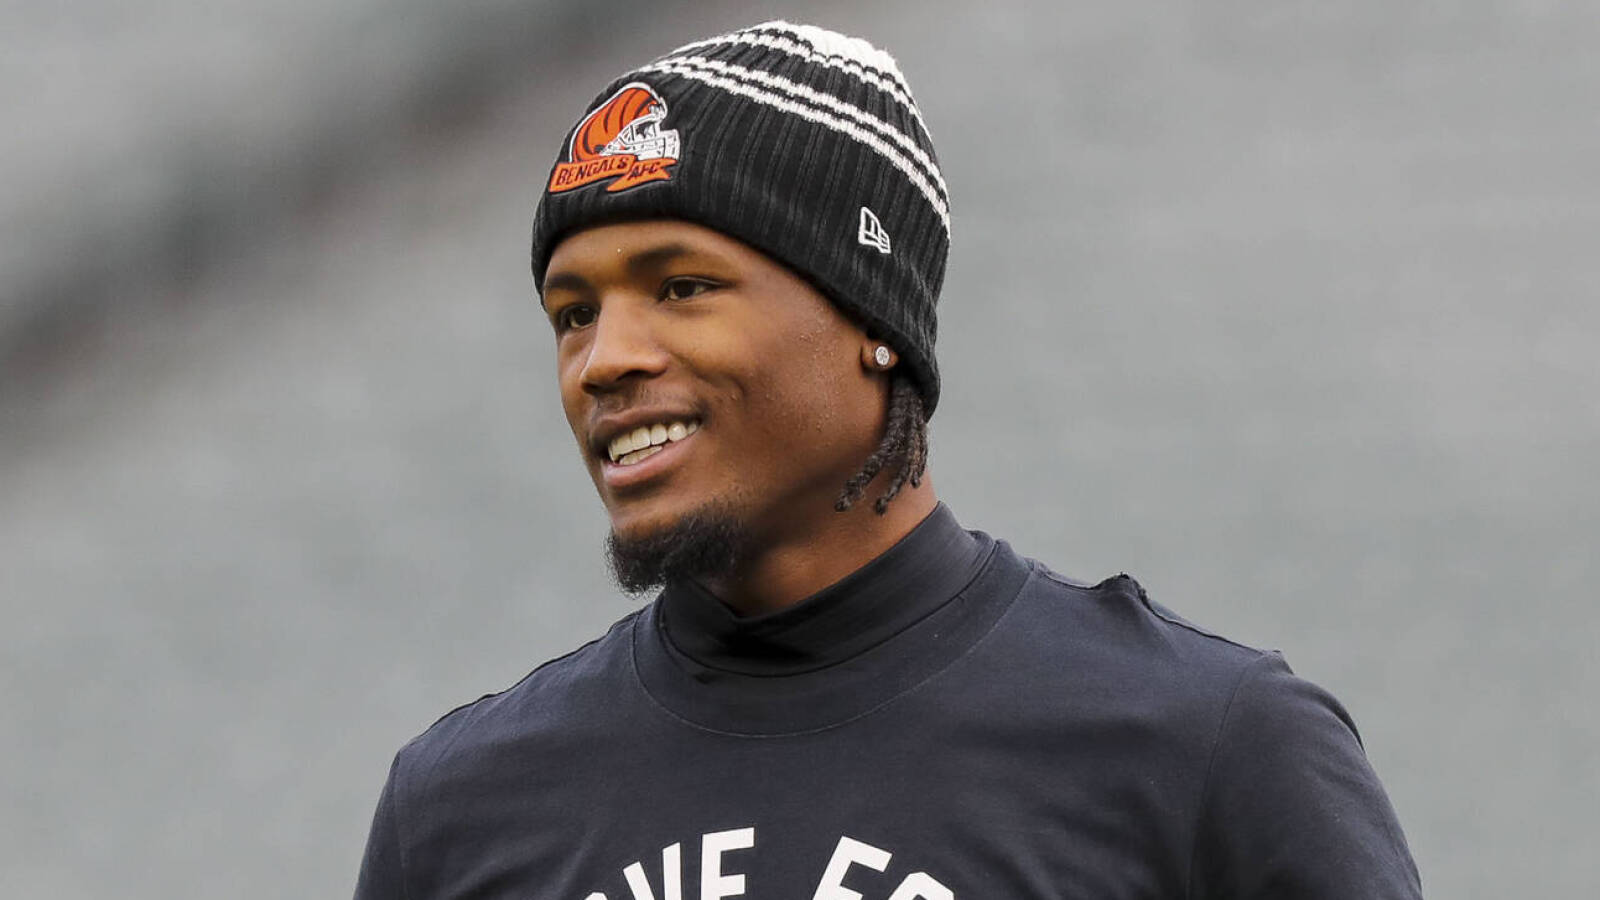 Bengals' Tee Higgins wants to connect with Bills' Damar Hamlin before playoff game